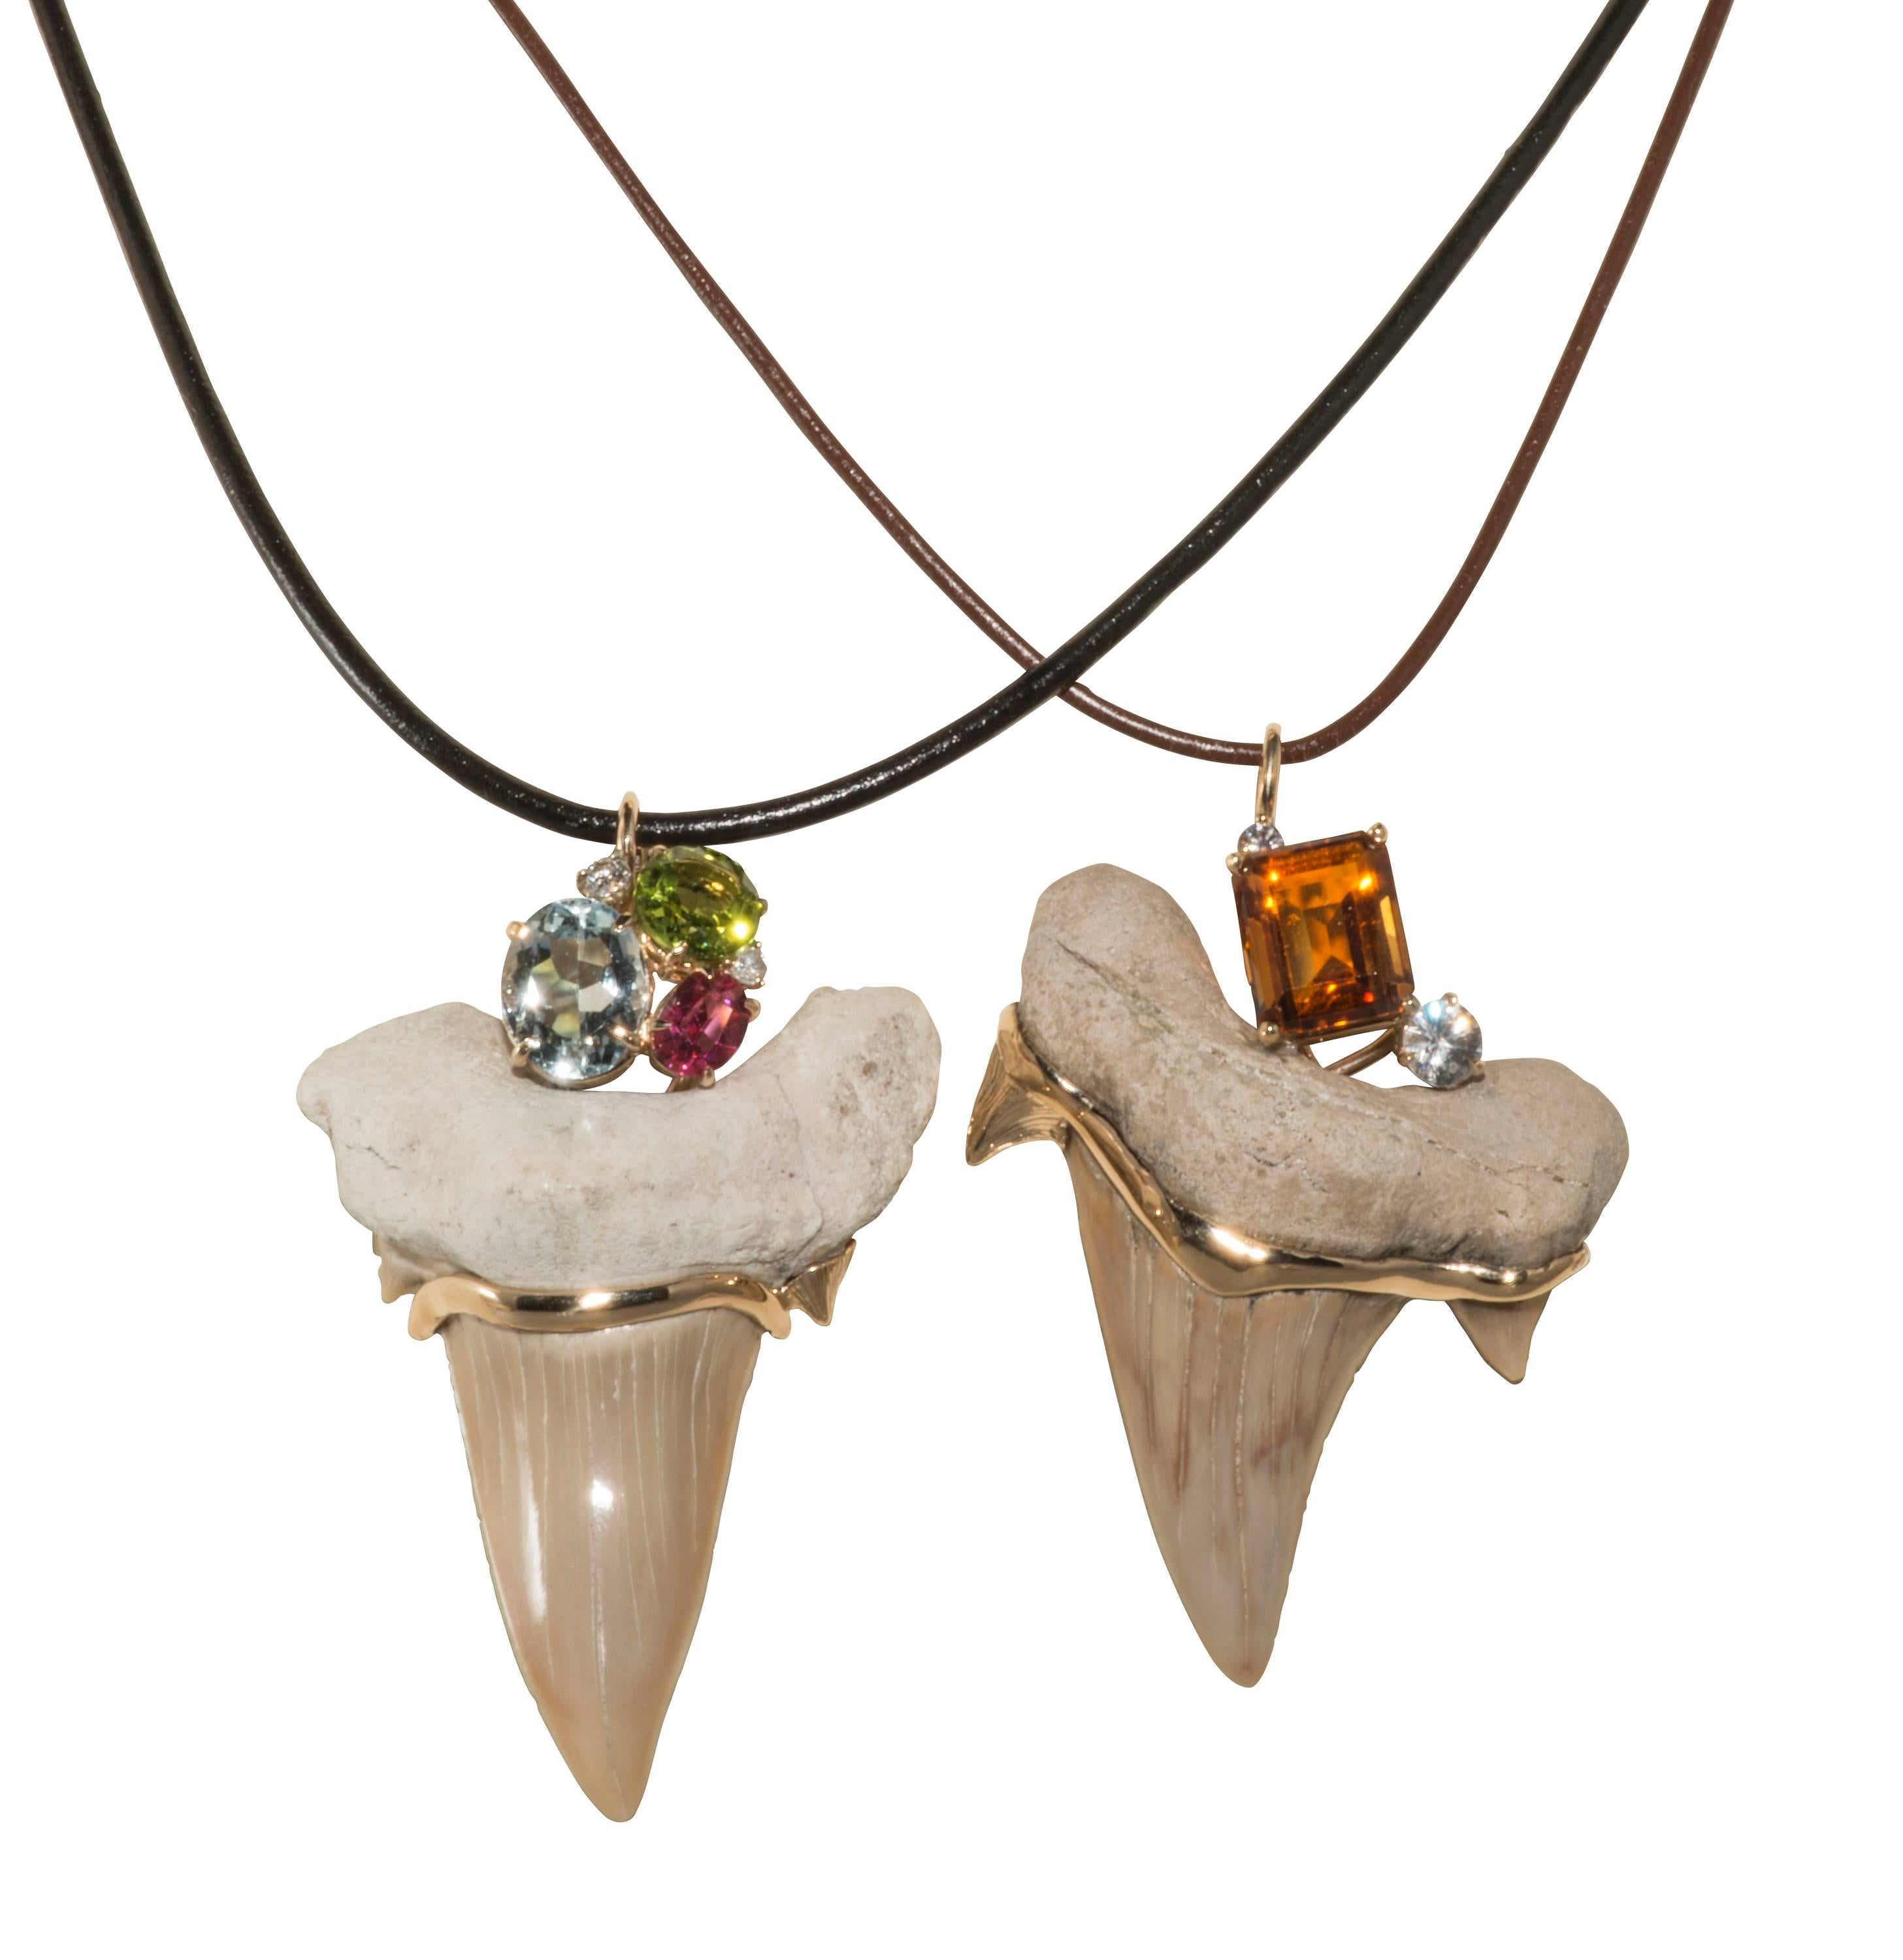 This pendant is made from a fossilized sharks tooth with a beautiful citrine and natural zircon set in 14k yellow gold.